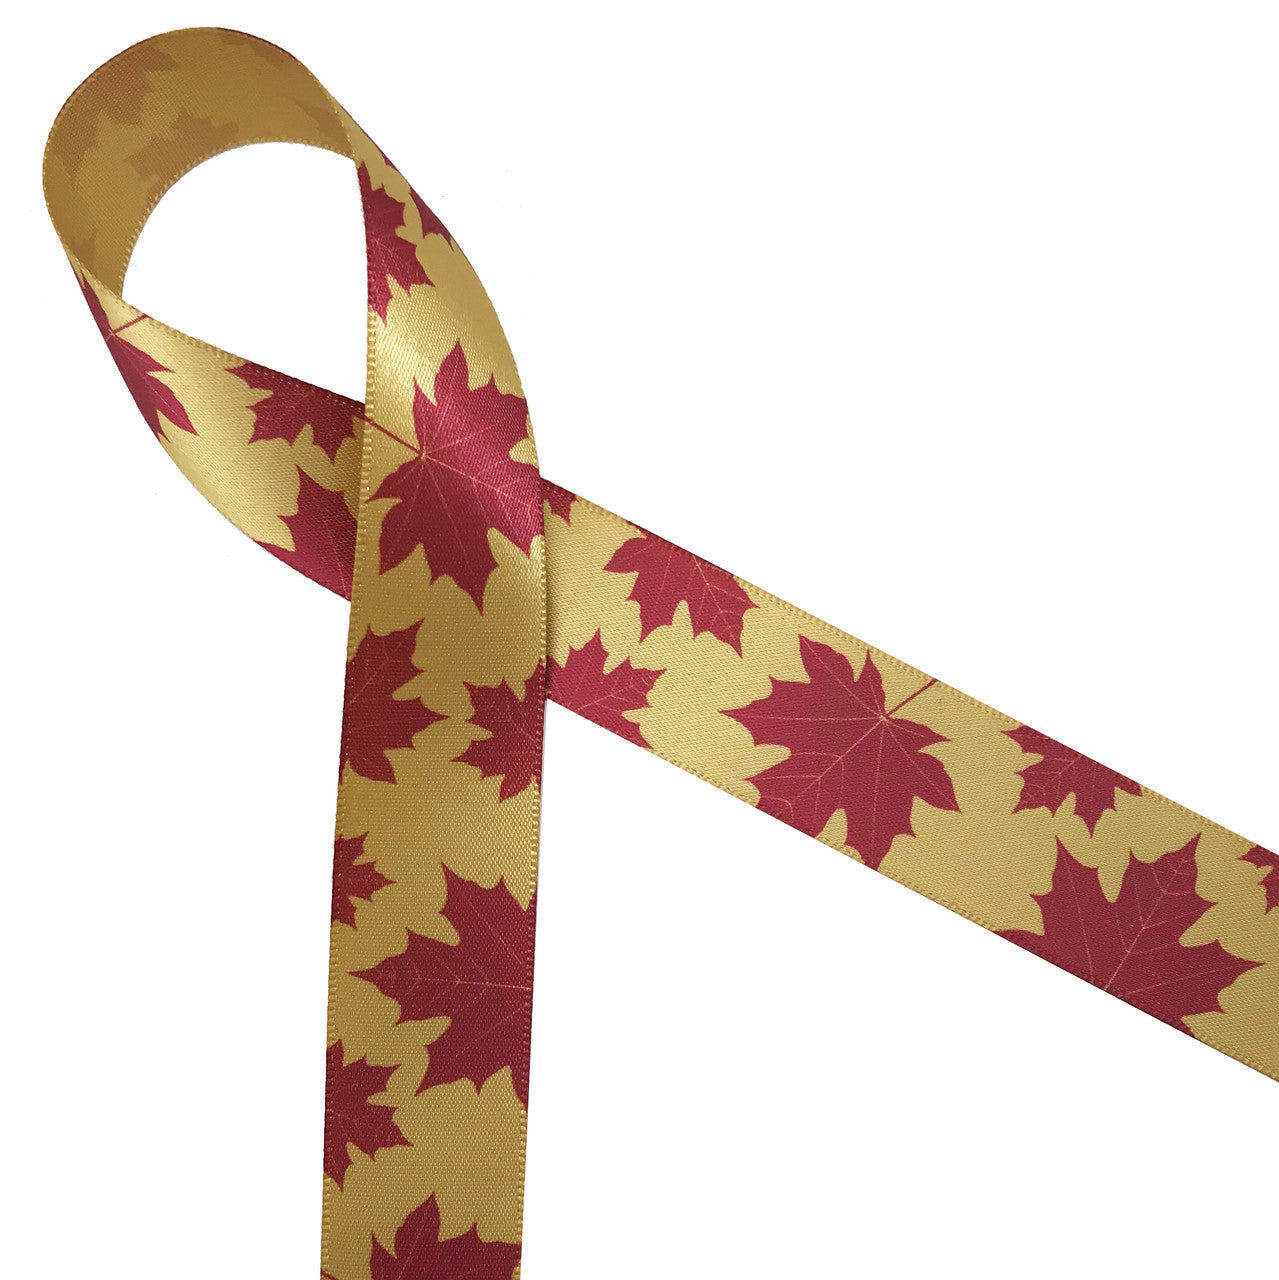 Maple leaves in red on 7/8" dijon gold single face satin ribbon is the ideal expression of Autumn!